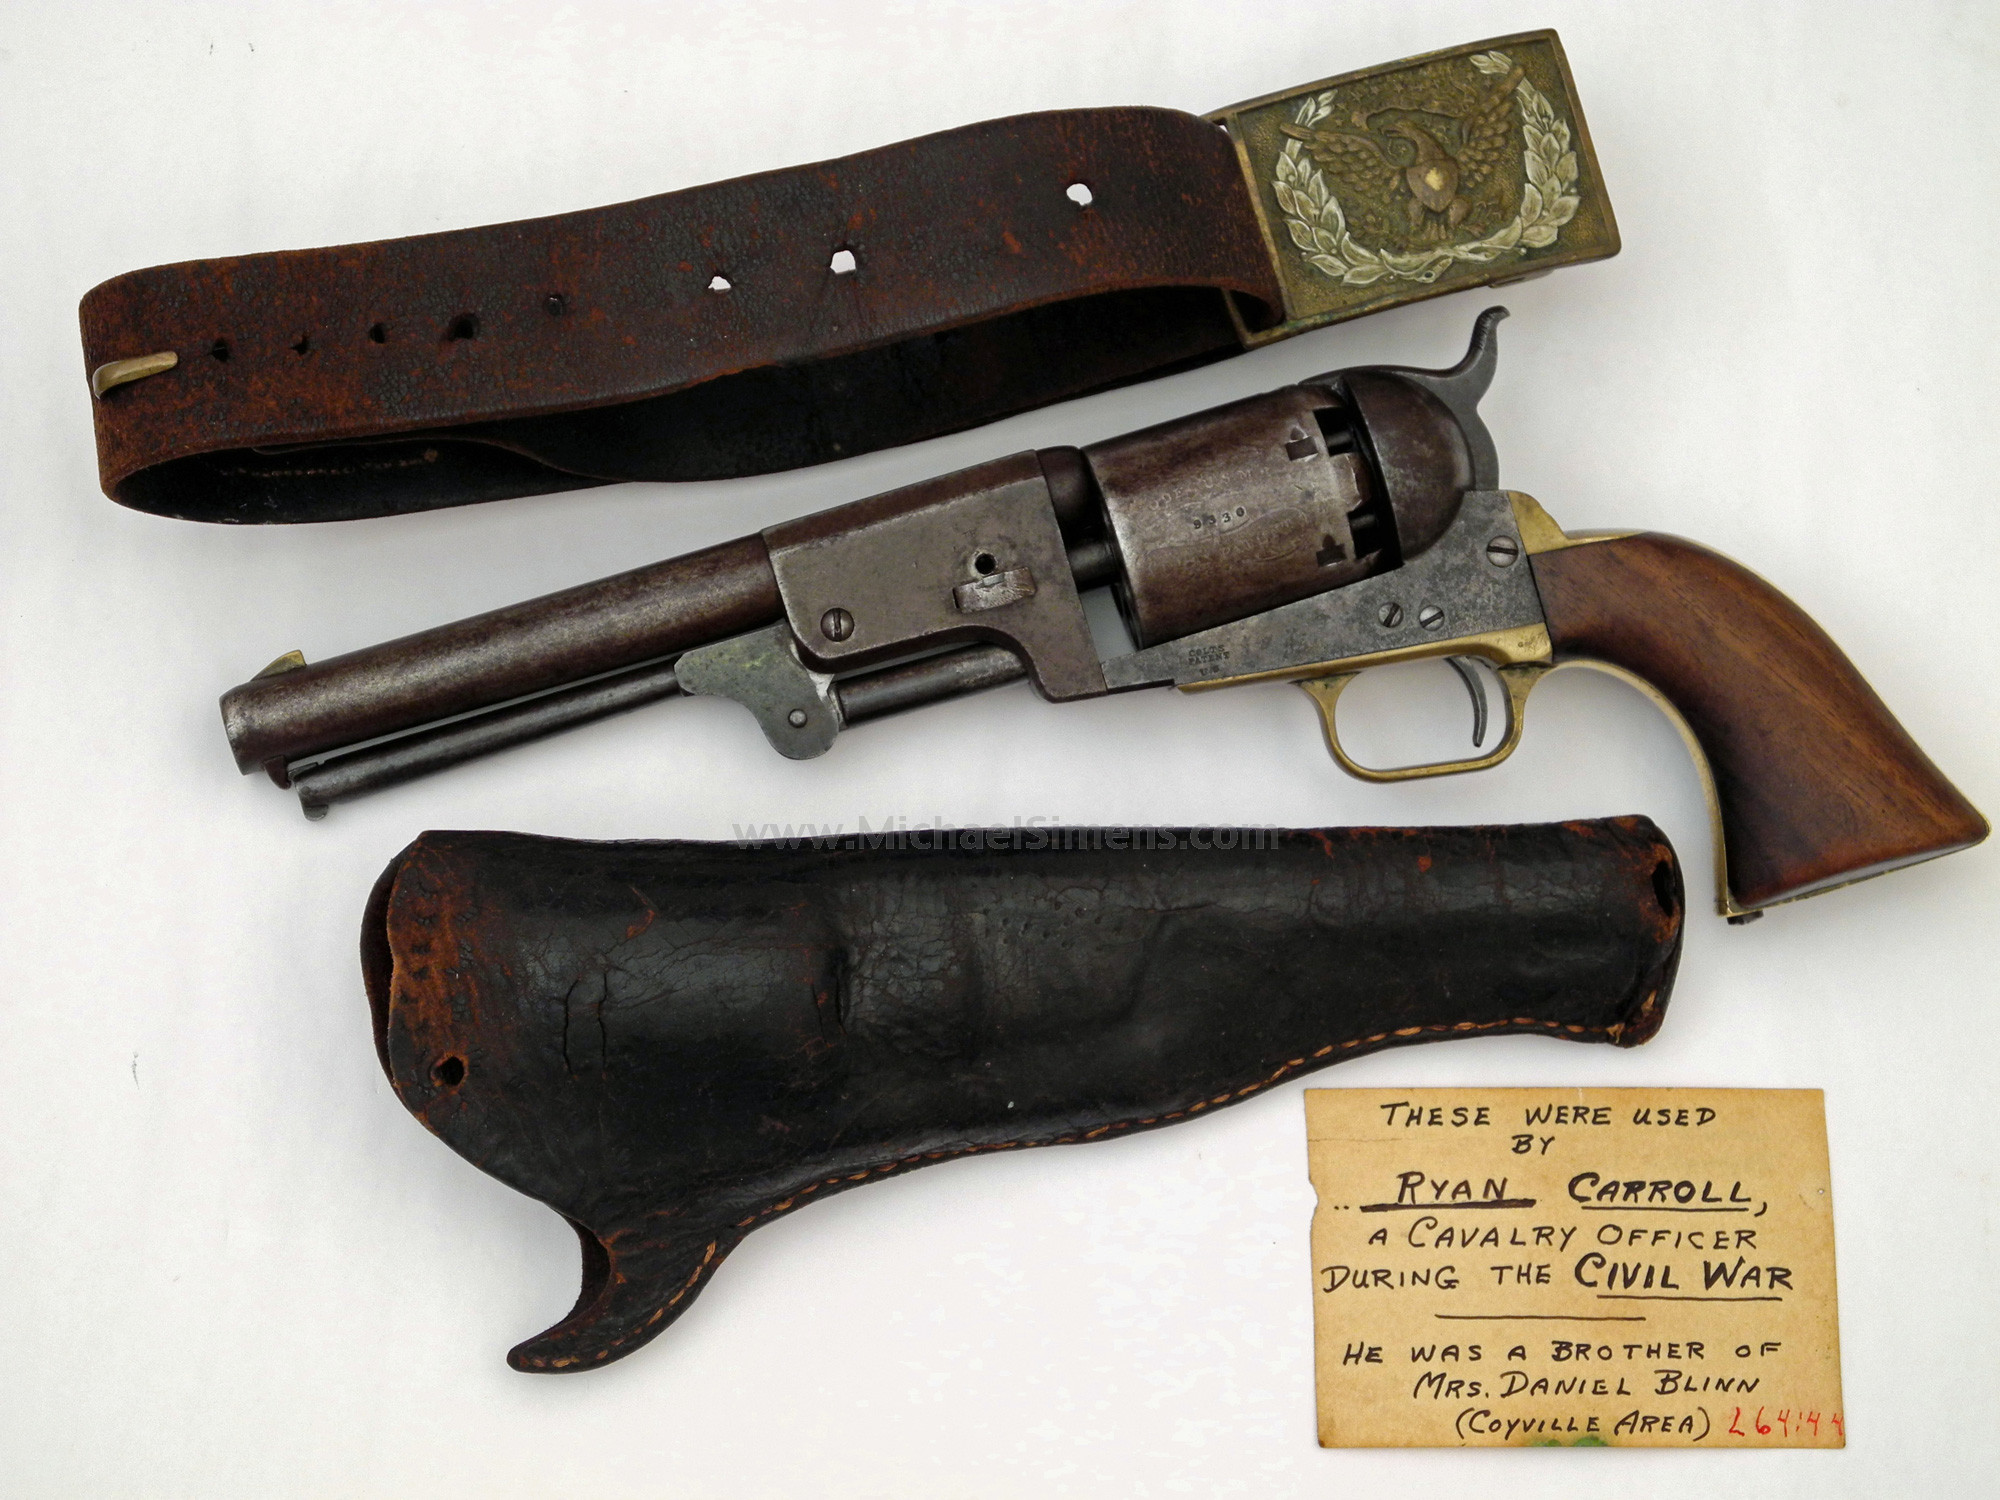 COLT THIRD MODEL DRAGOON REVOLVER, IDENTIFIED - HISTORICAL ARMS